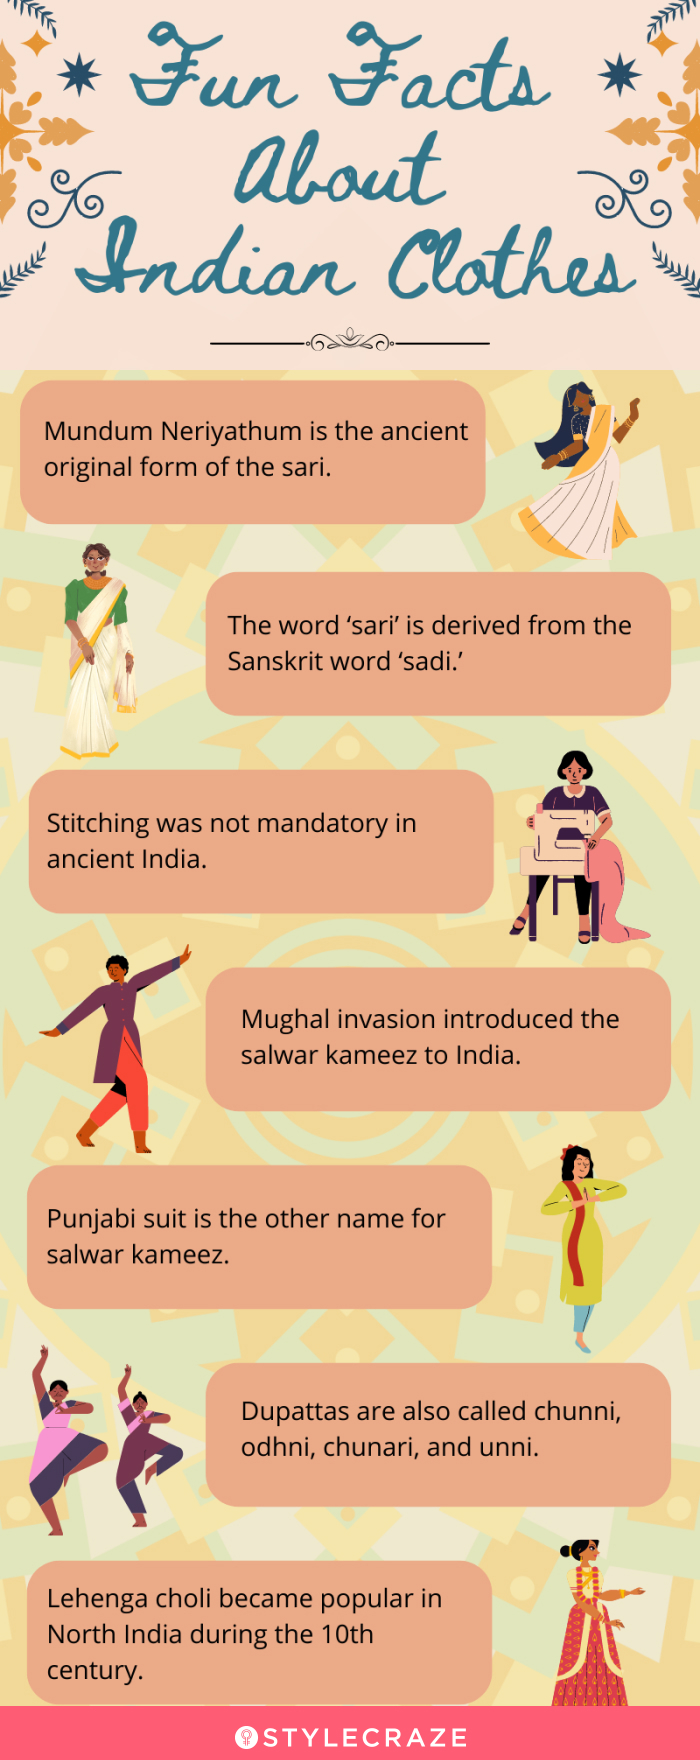 fun facts about indian clothes [infographic]